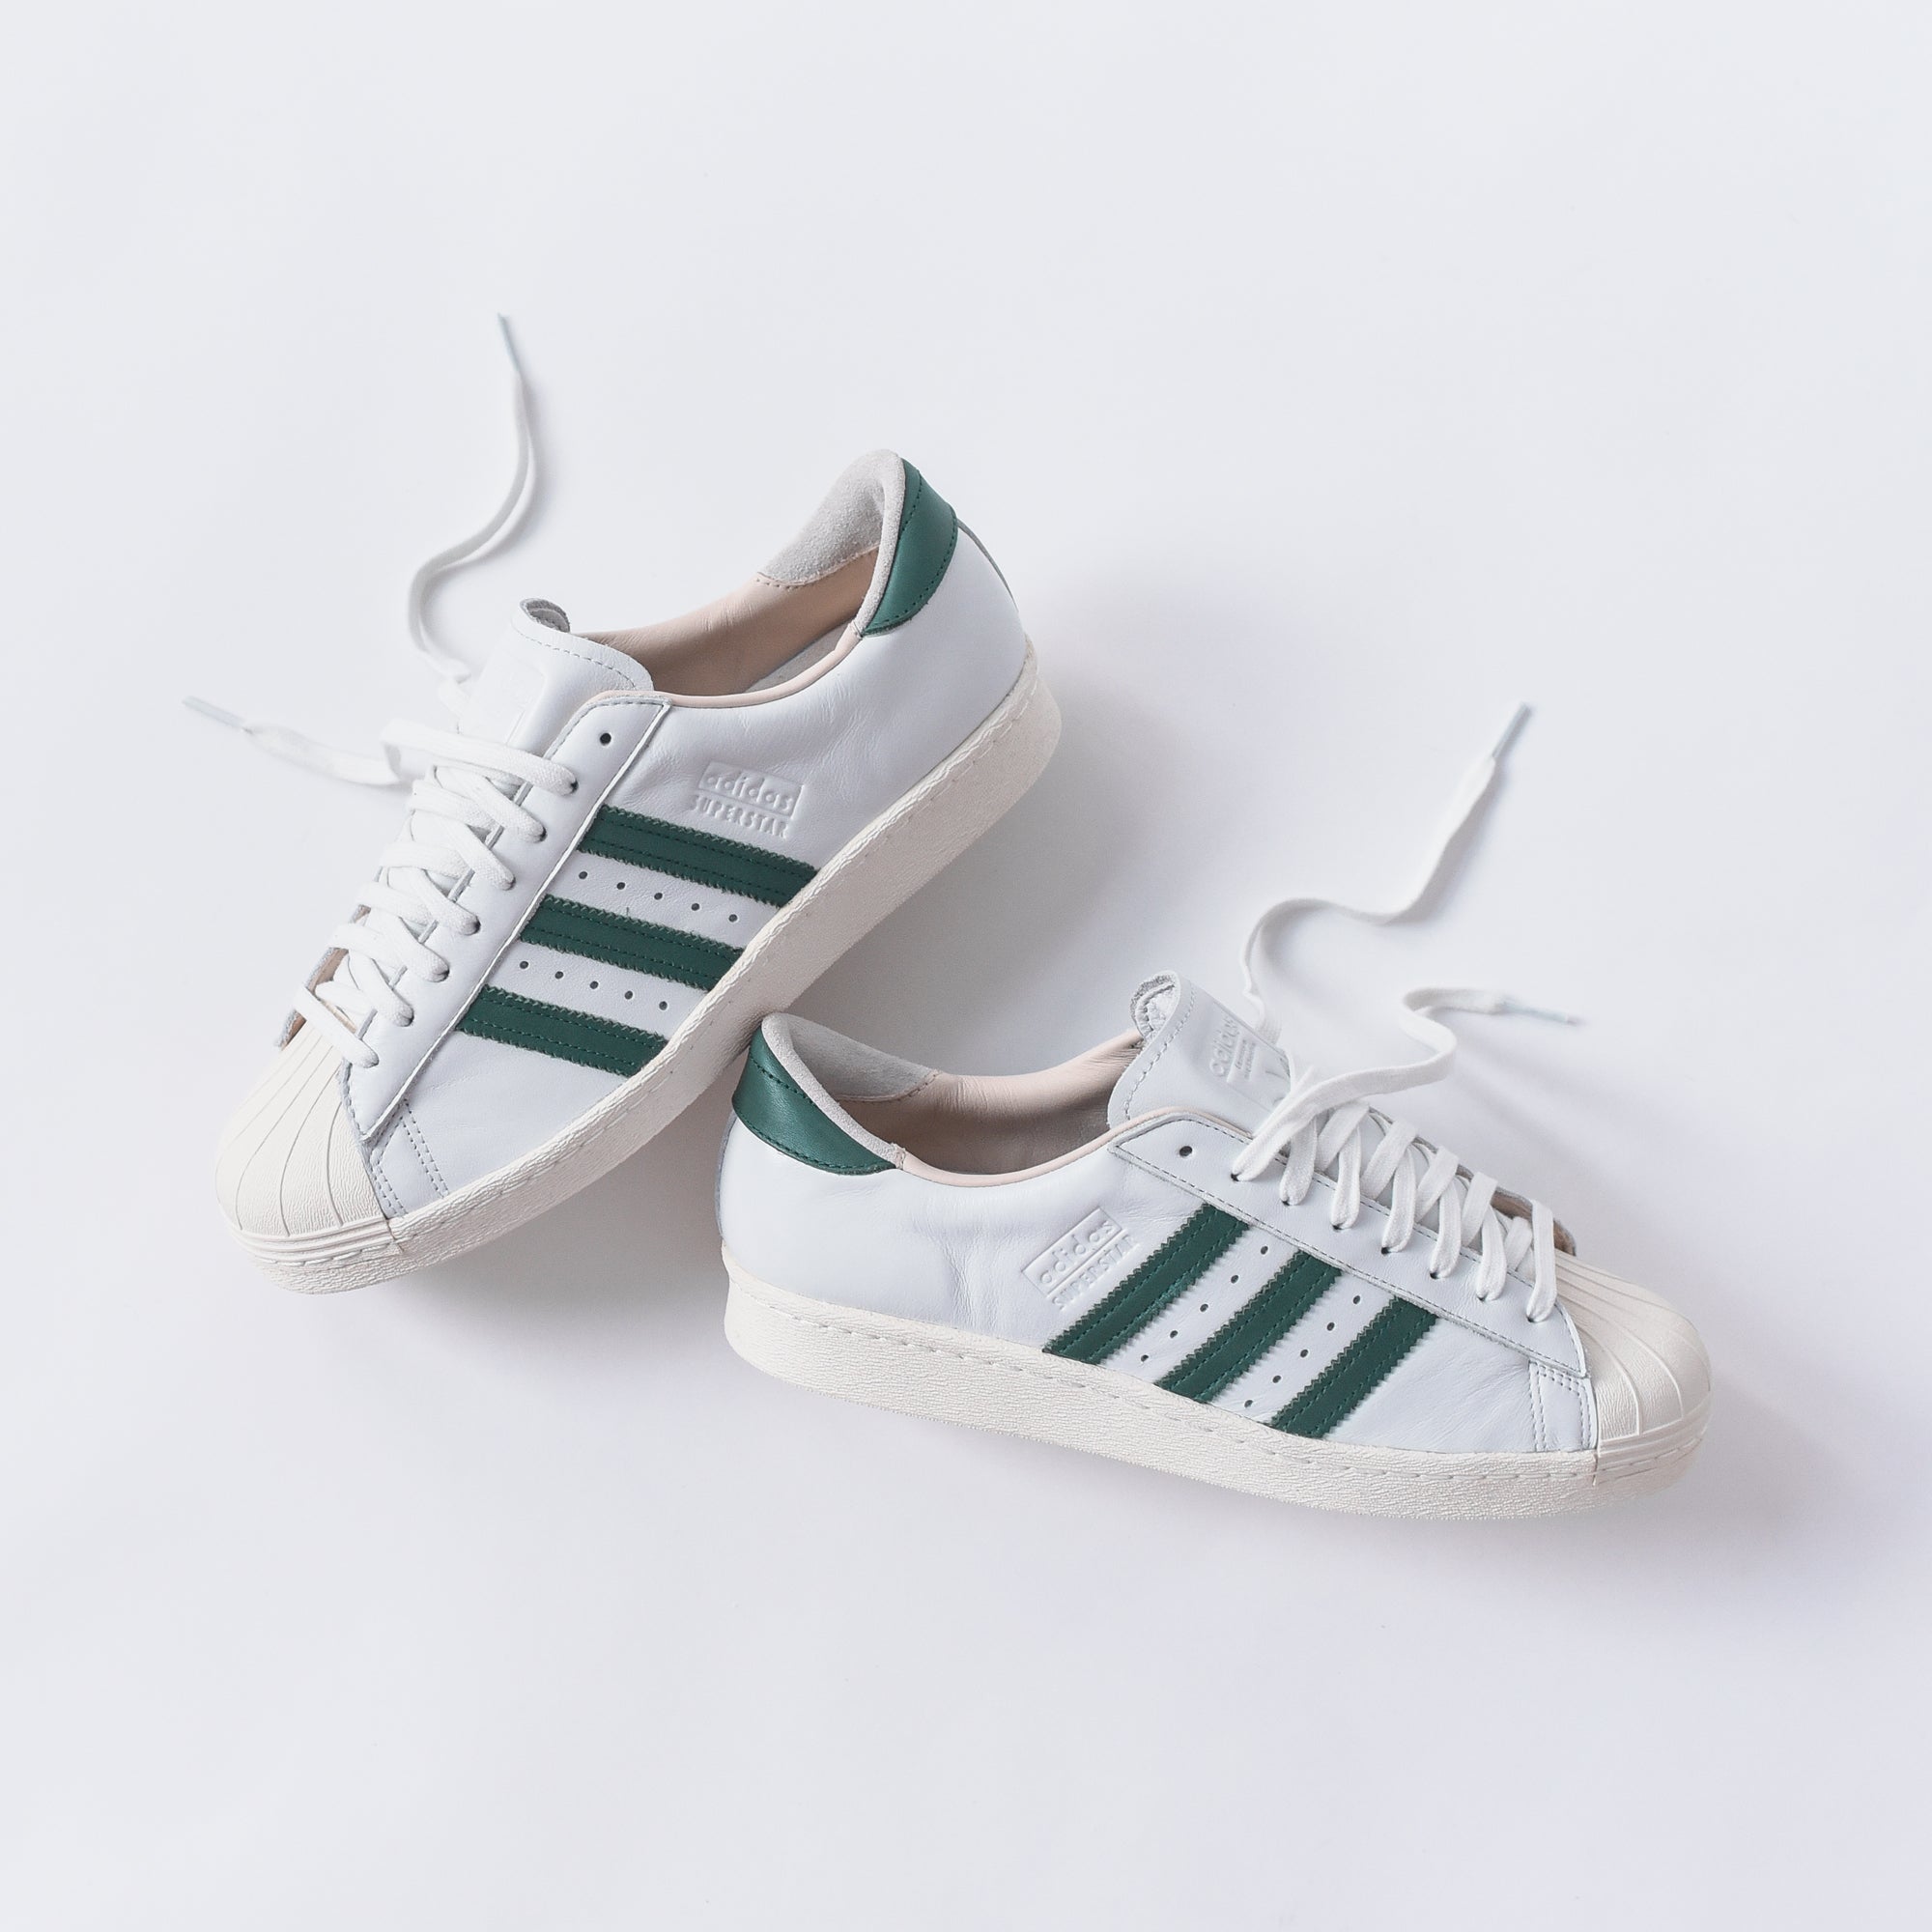 adidas superstar shoes green stripes